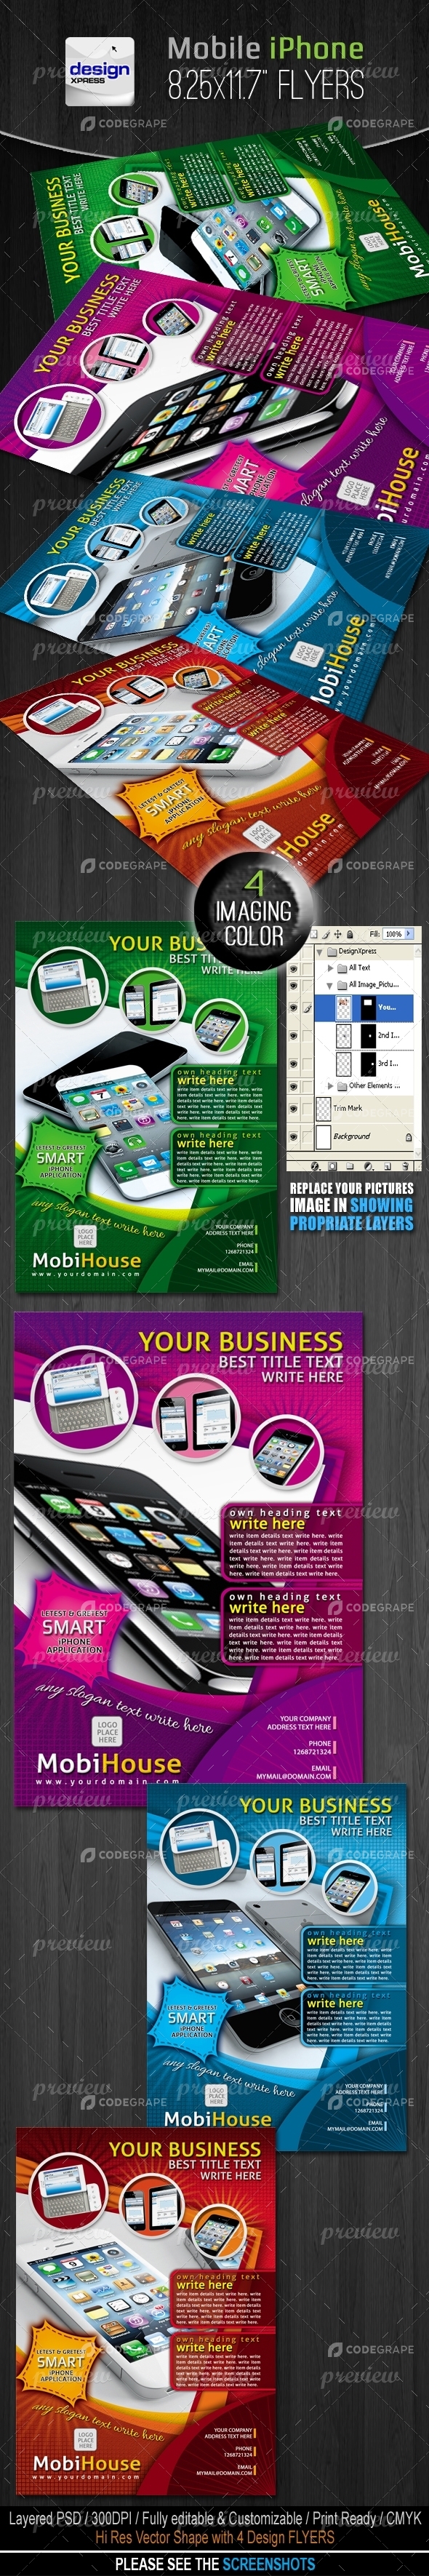 Mobile iPhone Application Flyers/Adds